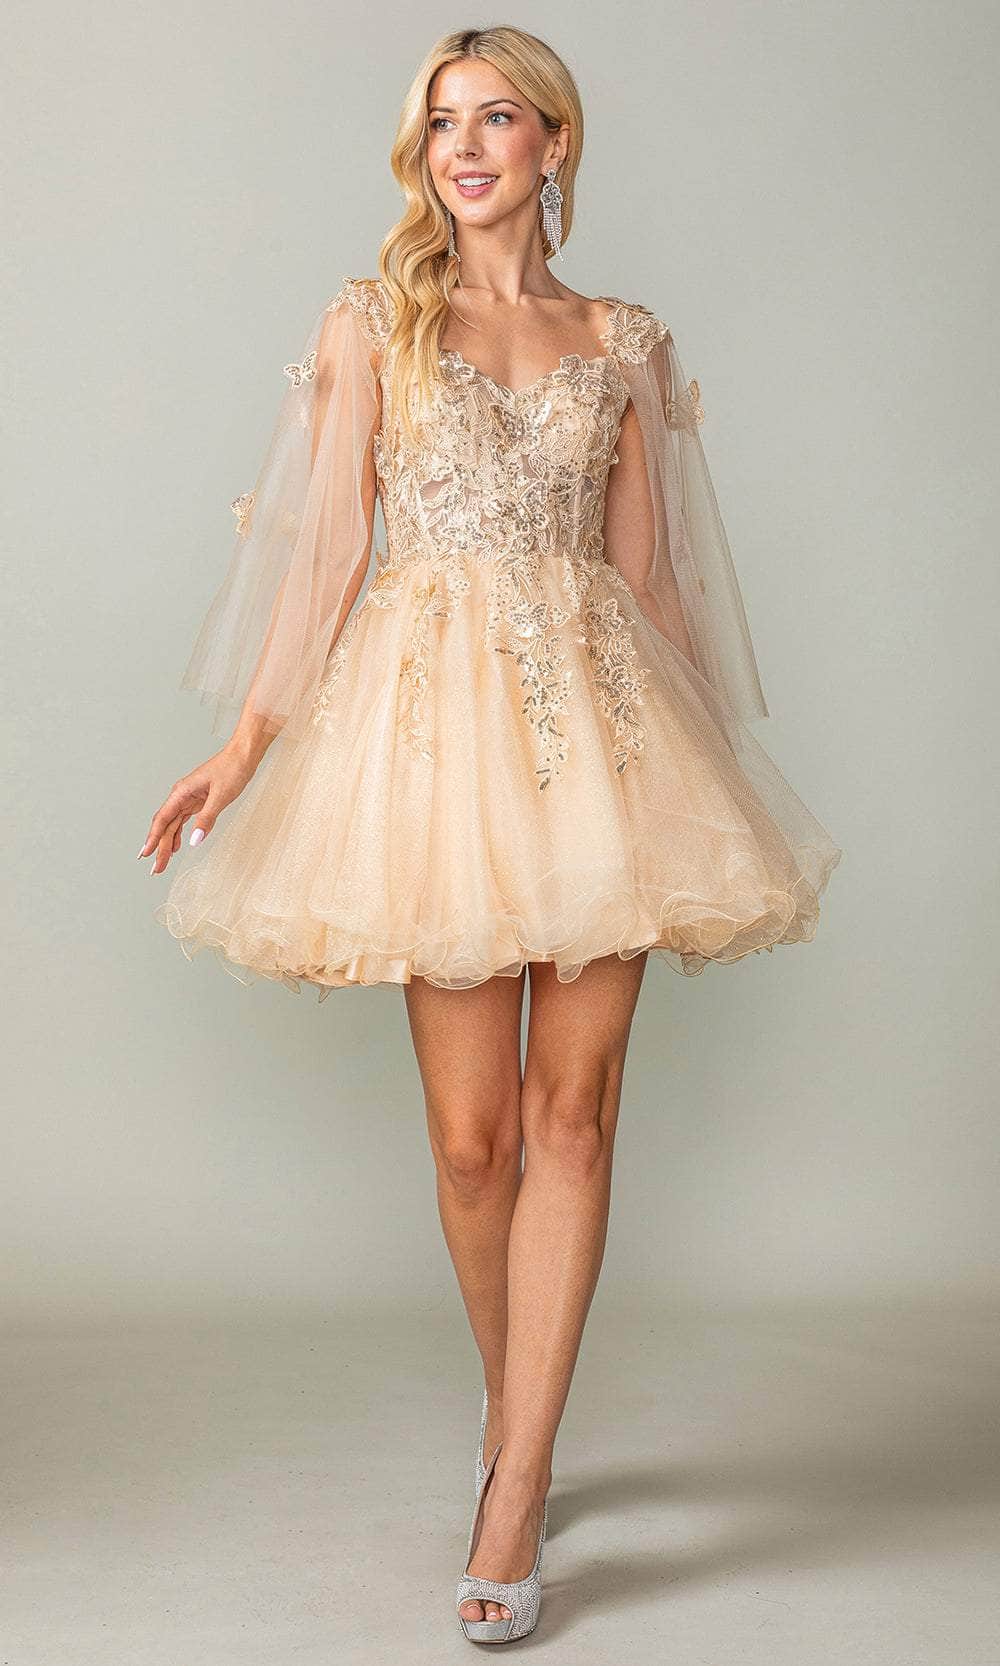 Dancing Queen 3393 - Embellished Lace Cocktail Dress Special Occasion Dresses